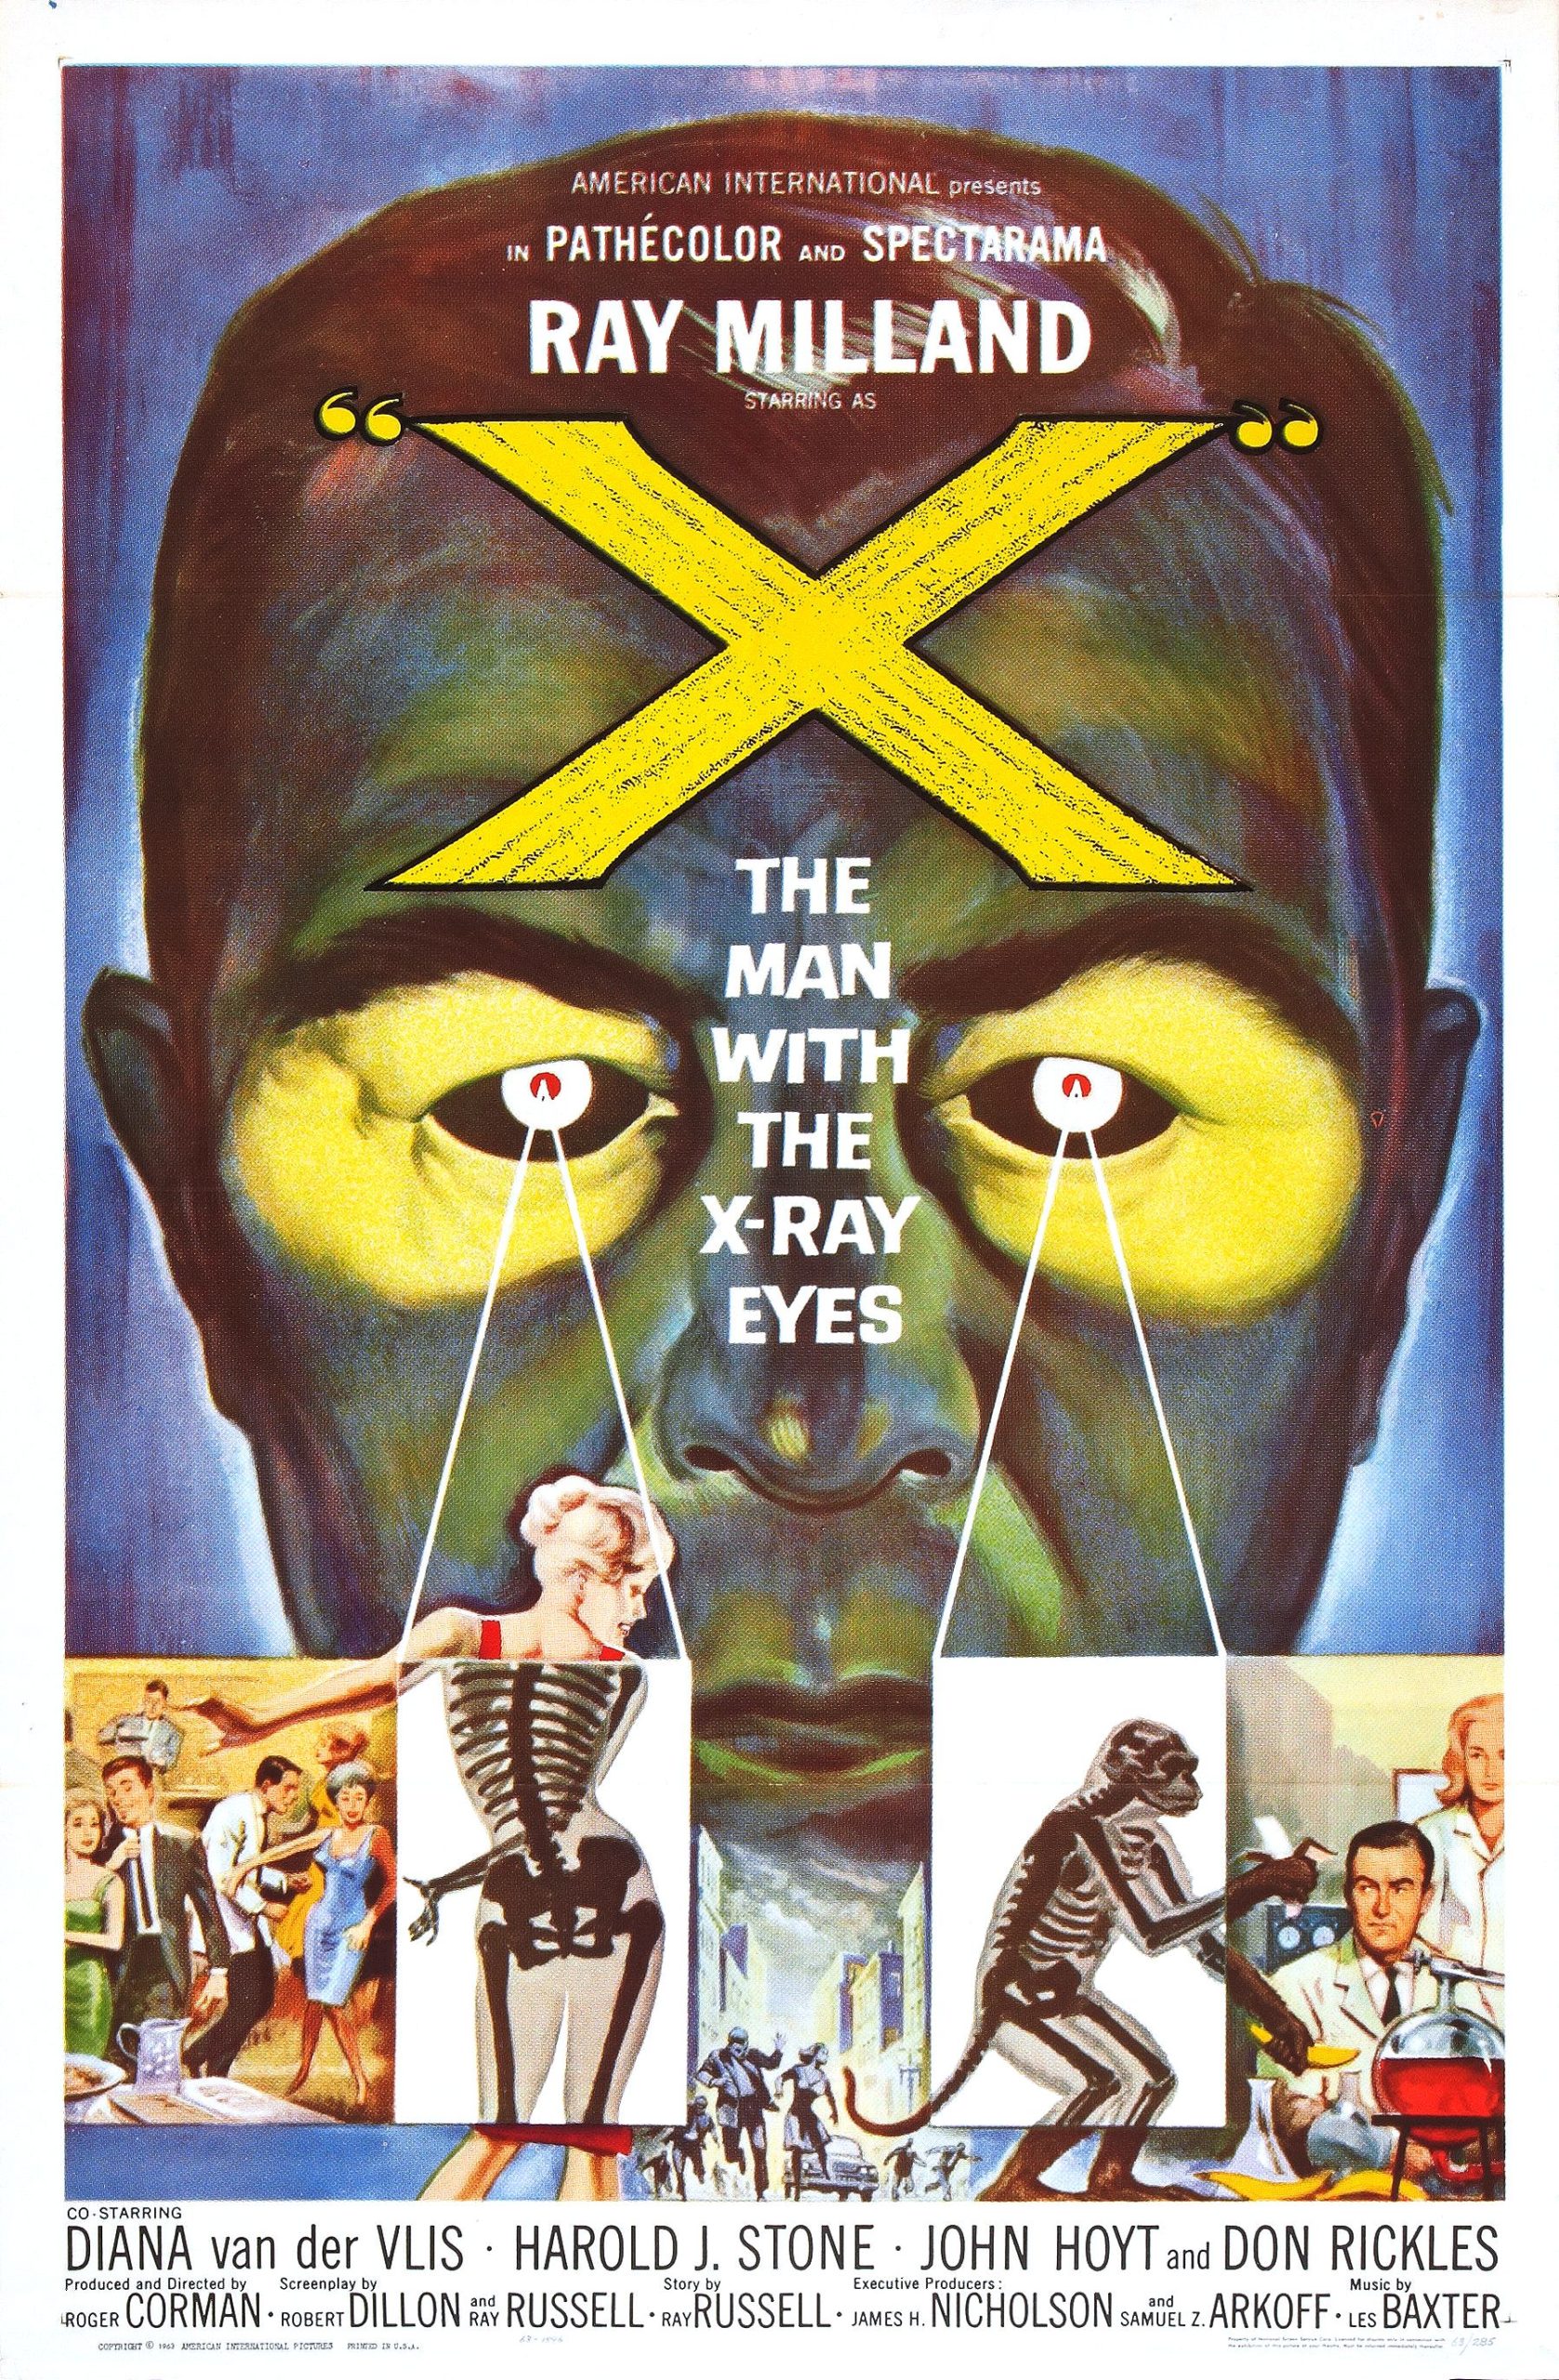 X: The Man with the X-Ray Eyes